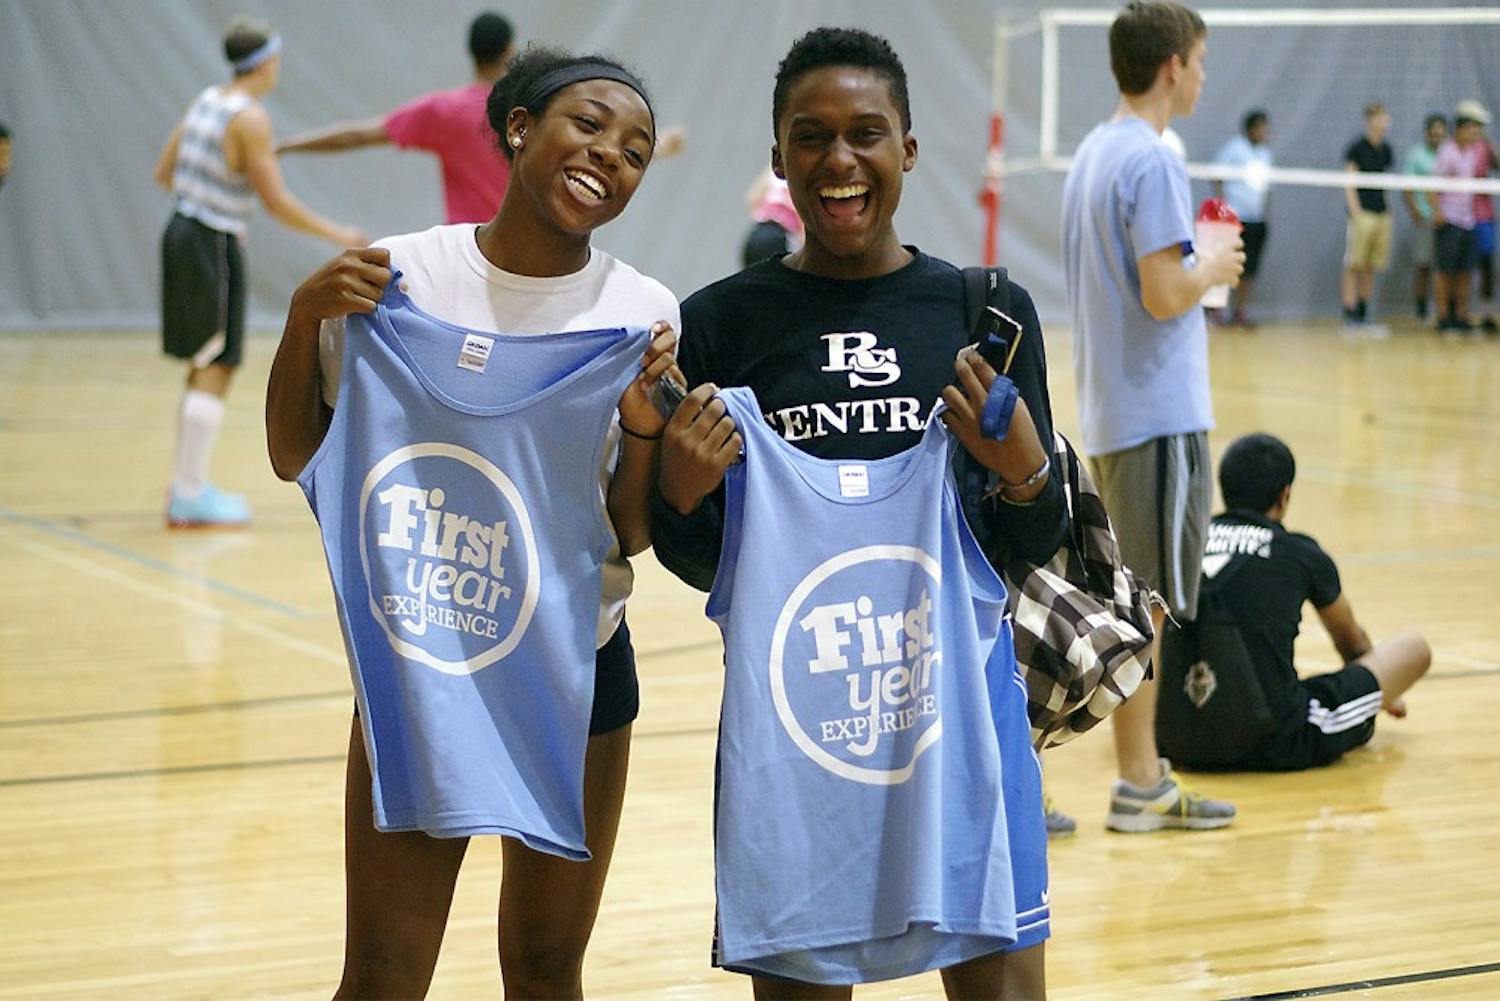 Freshmen Janice Ezenwa and Shawn Hines attended the First Year Experience basketball and volleyball tournament in Rams Head Recreation Center on Friday, Sept. 12, 2014. 